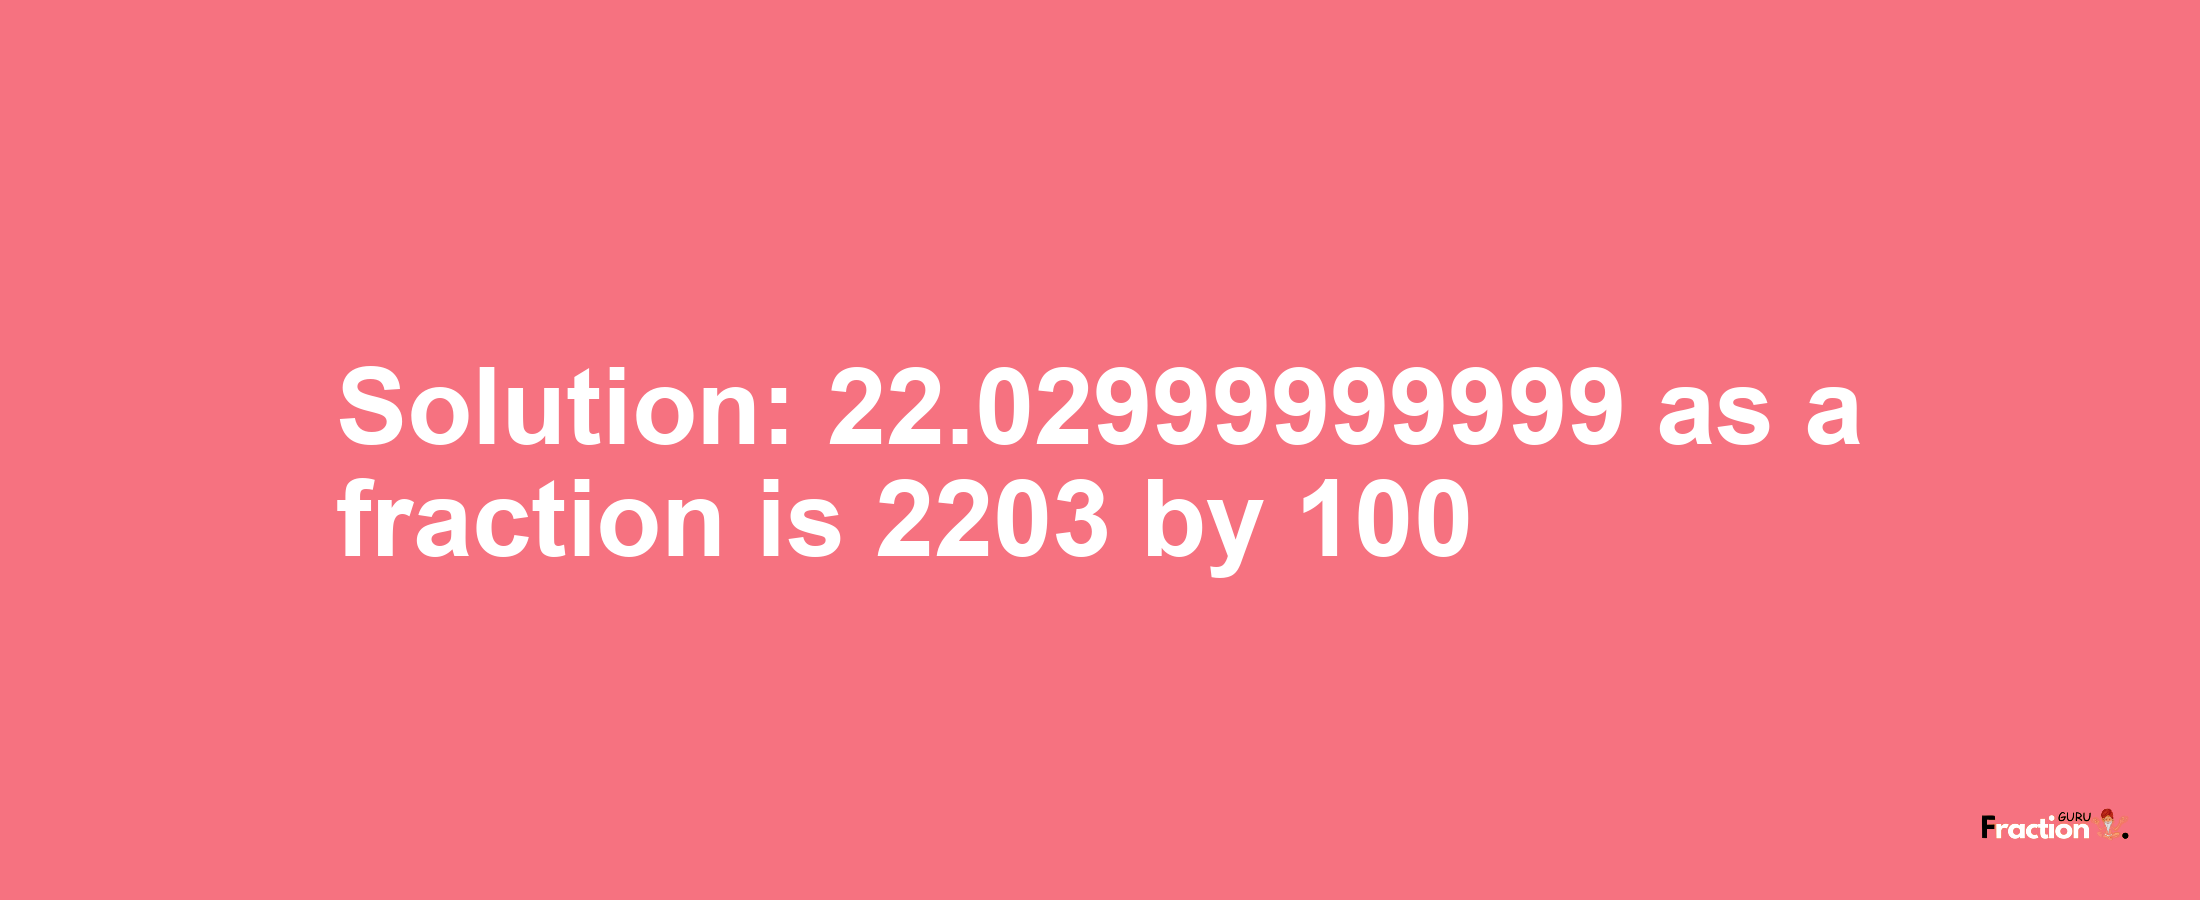 Solution:22.02999999999 as a fraction is 2203/100